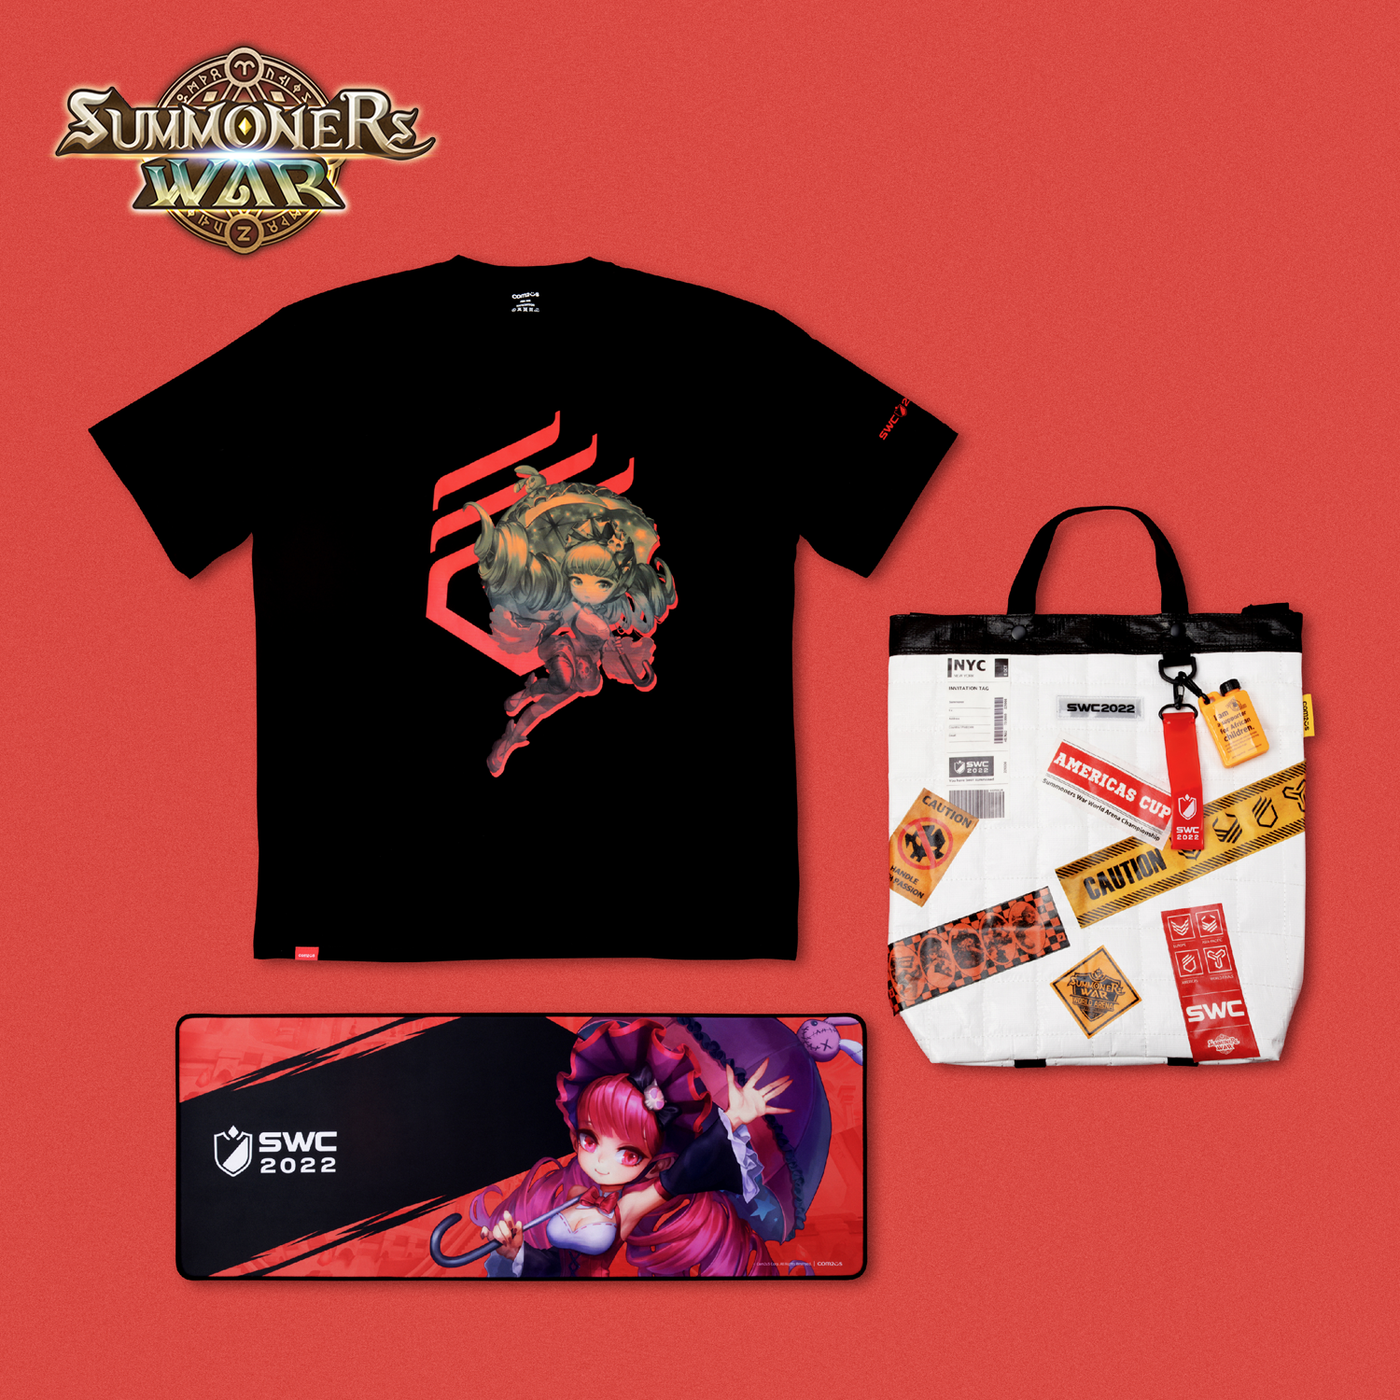 [SWC2023] SWC2022 AMERICAS Limited Goods